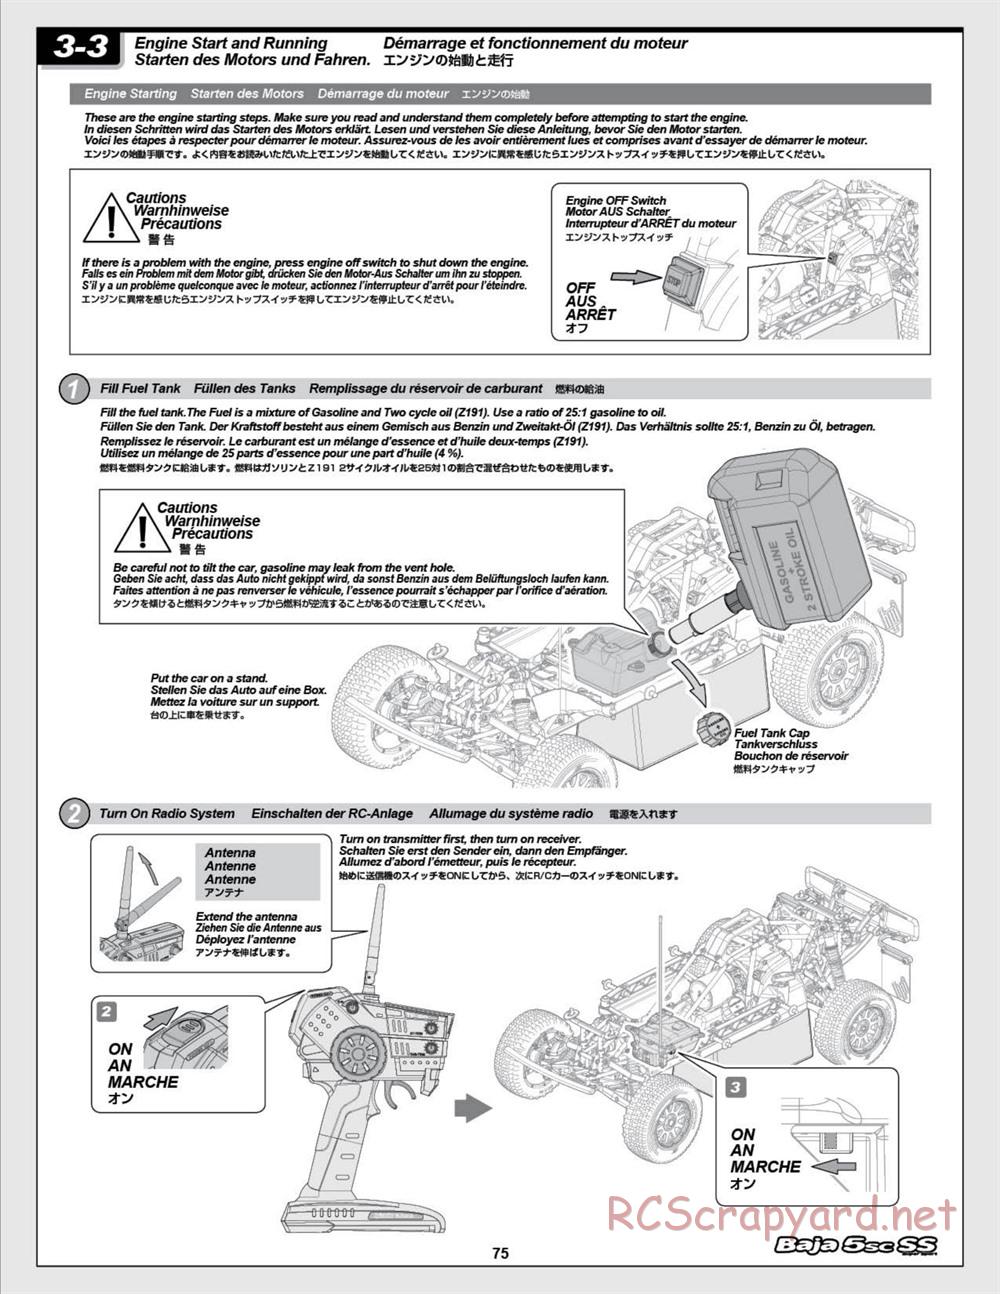 HPI - Baja 5SC SS - Exploded View - Page 75